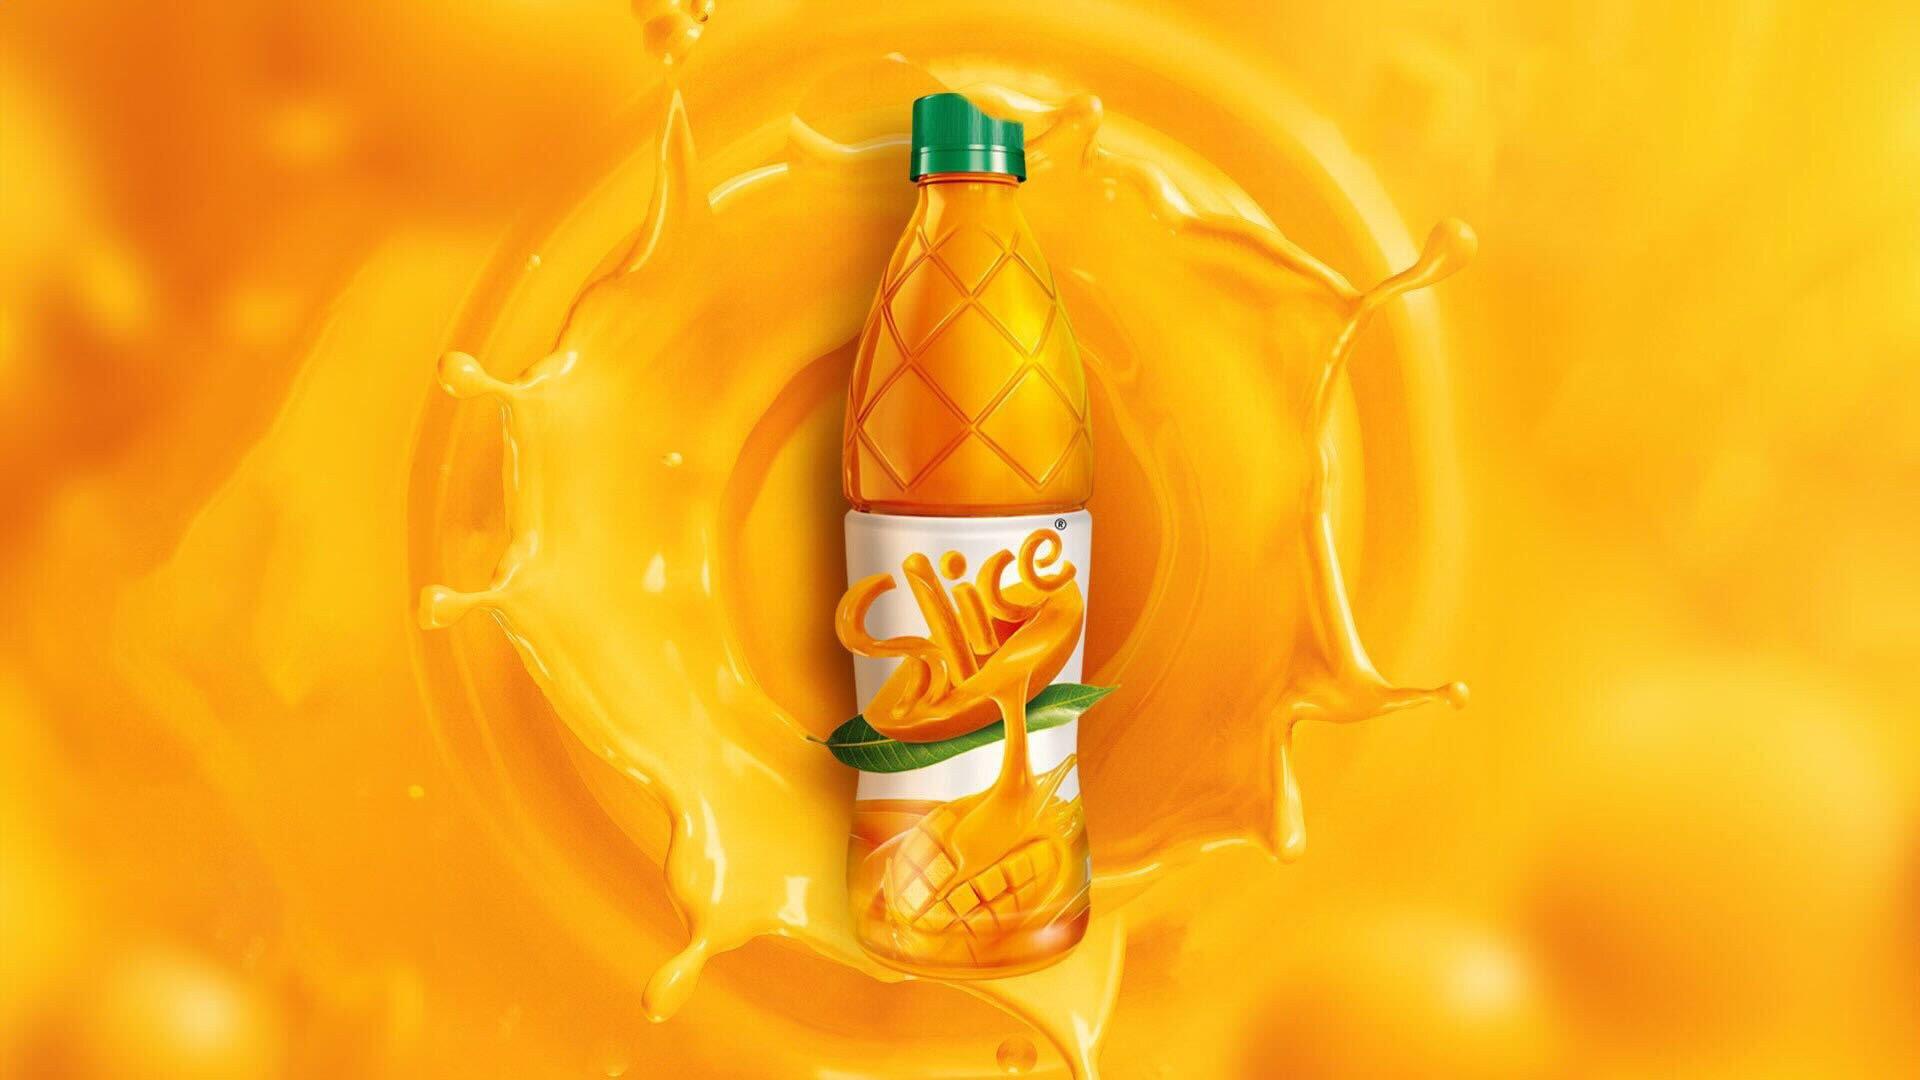 Pictured is a bottle of the Slice mango drink.